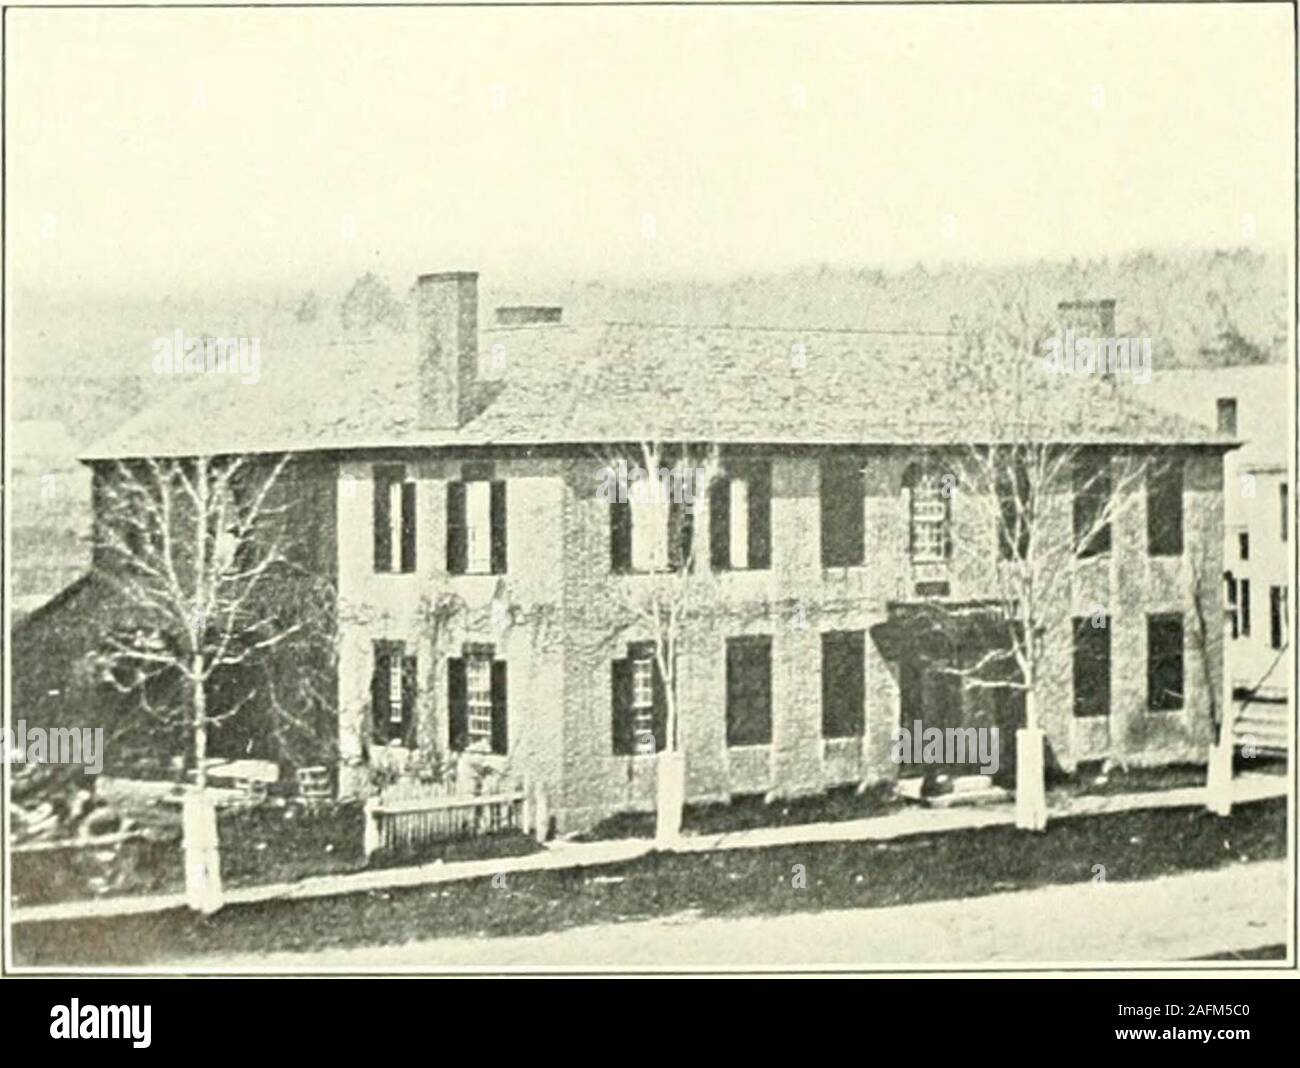 . Genealogical and family history of the state of Maine;. Manning Manse, Billerica, Mass. Samuel Manning—1696.. Cheney Mansion, Newpokt, N. H.Home of Col. Wm. Cheney, where Laeayette was entertained in 1824. STATE OF MAINE. 1807 Her father was a son of James, who was ason of Lionel Chute. John Cheney died Sep-tember 2, 1750, and was survived by his wifeonly eight days. Their children were: Ed-mund, Martha, Marv, Sarah, John and Ju-dith. (I) John (3), younger son and fifth childof John (2) and Hilary (Chute) Cheney, wasborn ]May 23, 1705, in Xewbury, and residedin that part of Veston now Sudb Stock Photo